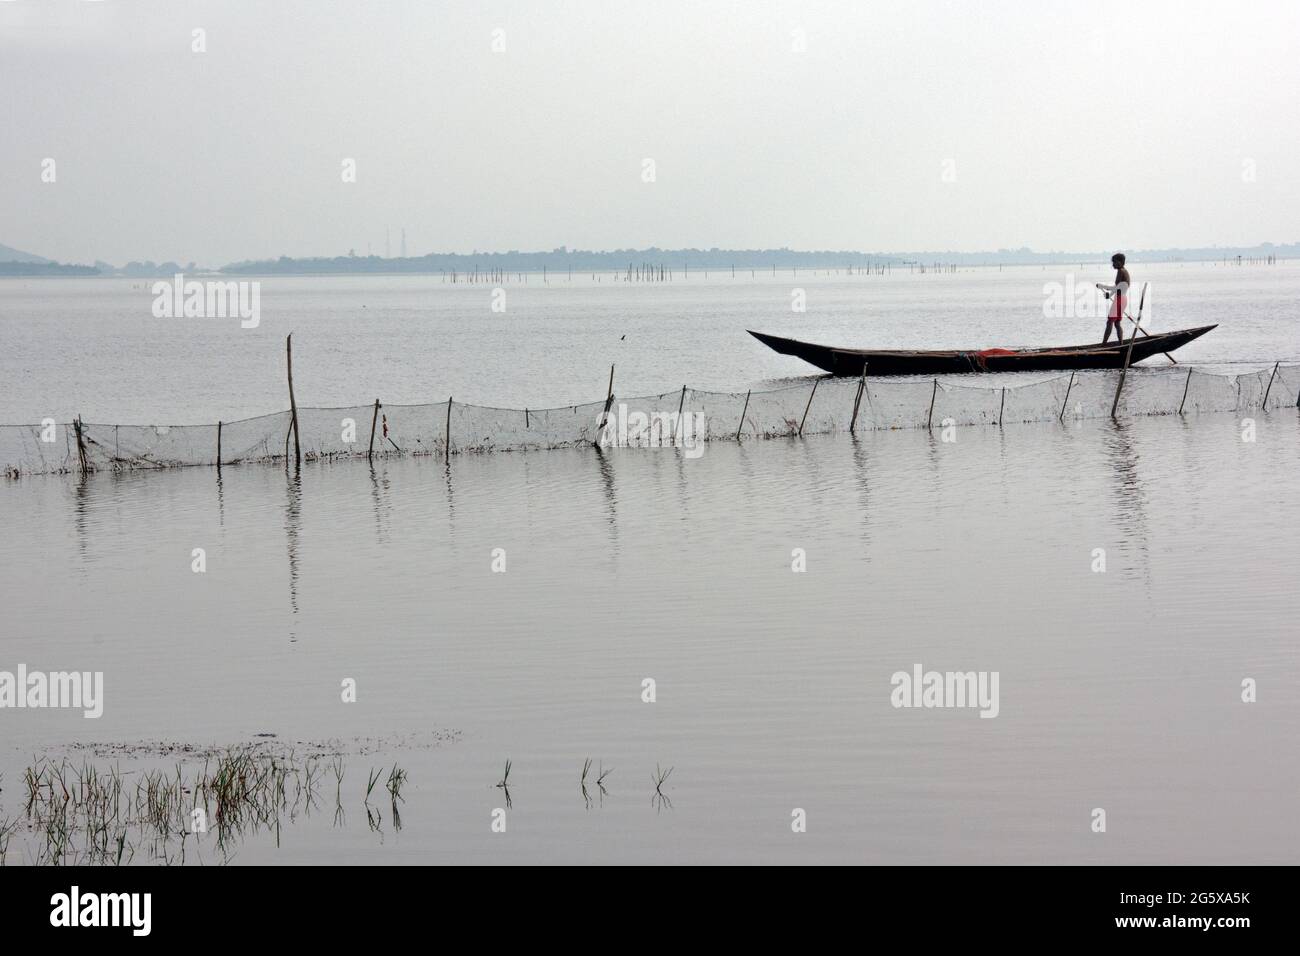 Picture of Chilka Lake in Rambha, Odisha. A fisherman is going fishing in the lake with his boat. Stock Photo